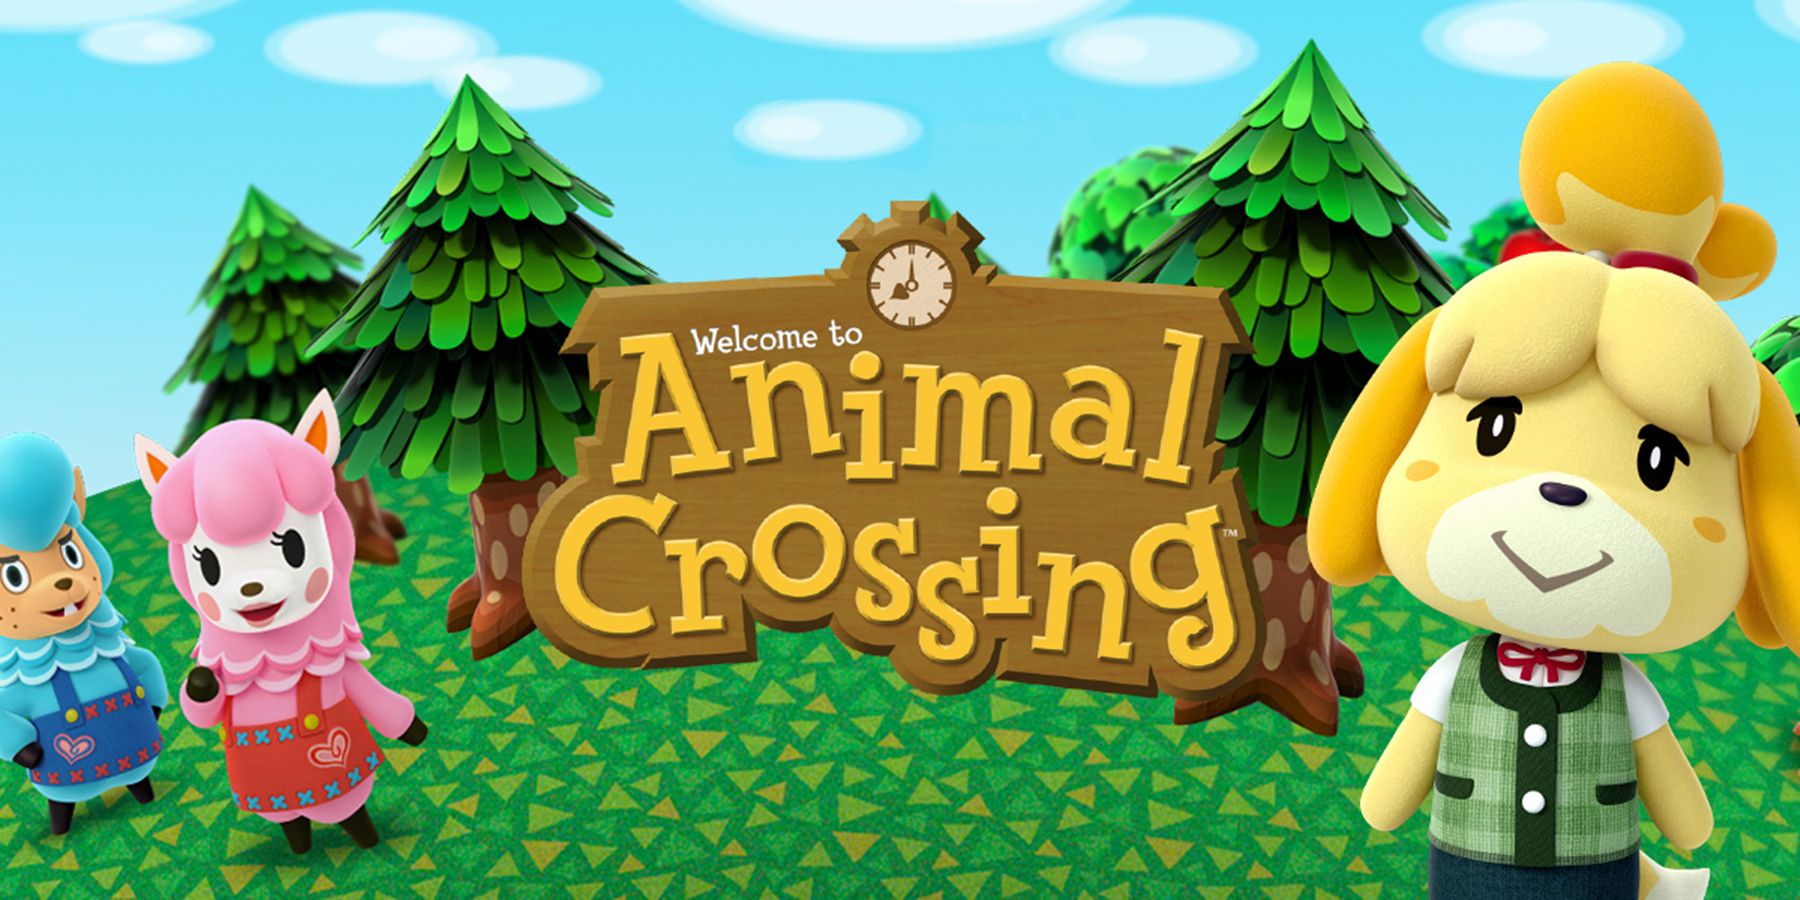 isabelle cyrus reese animal crossing banner